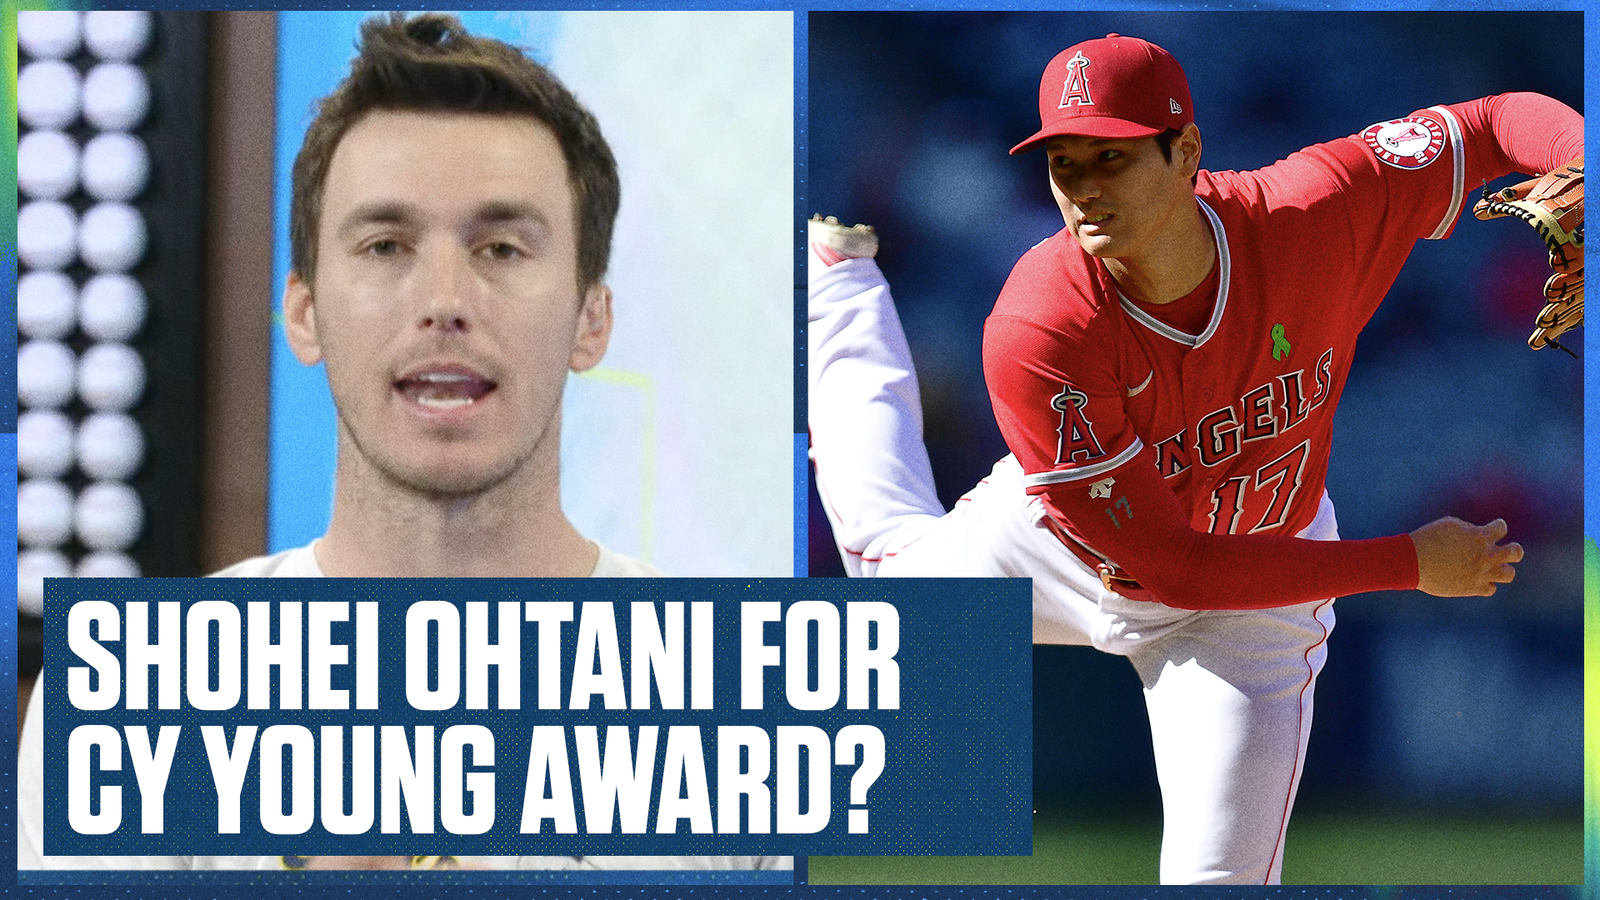 Is Shohei Ohtani a leading Cy Young candidate?